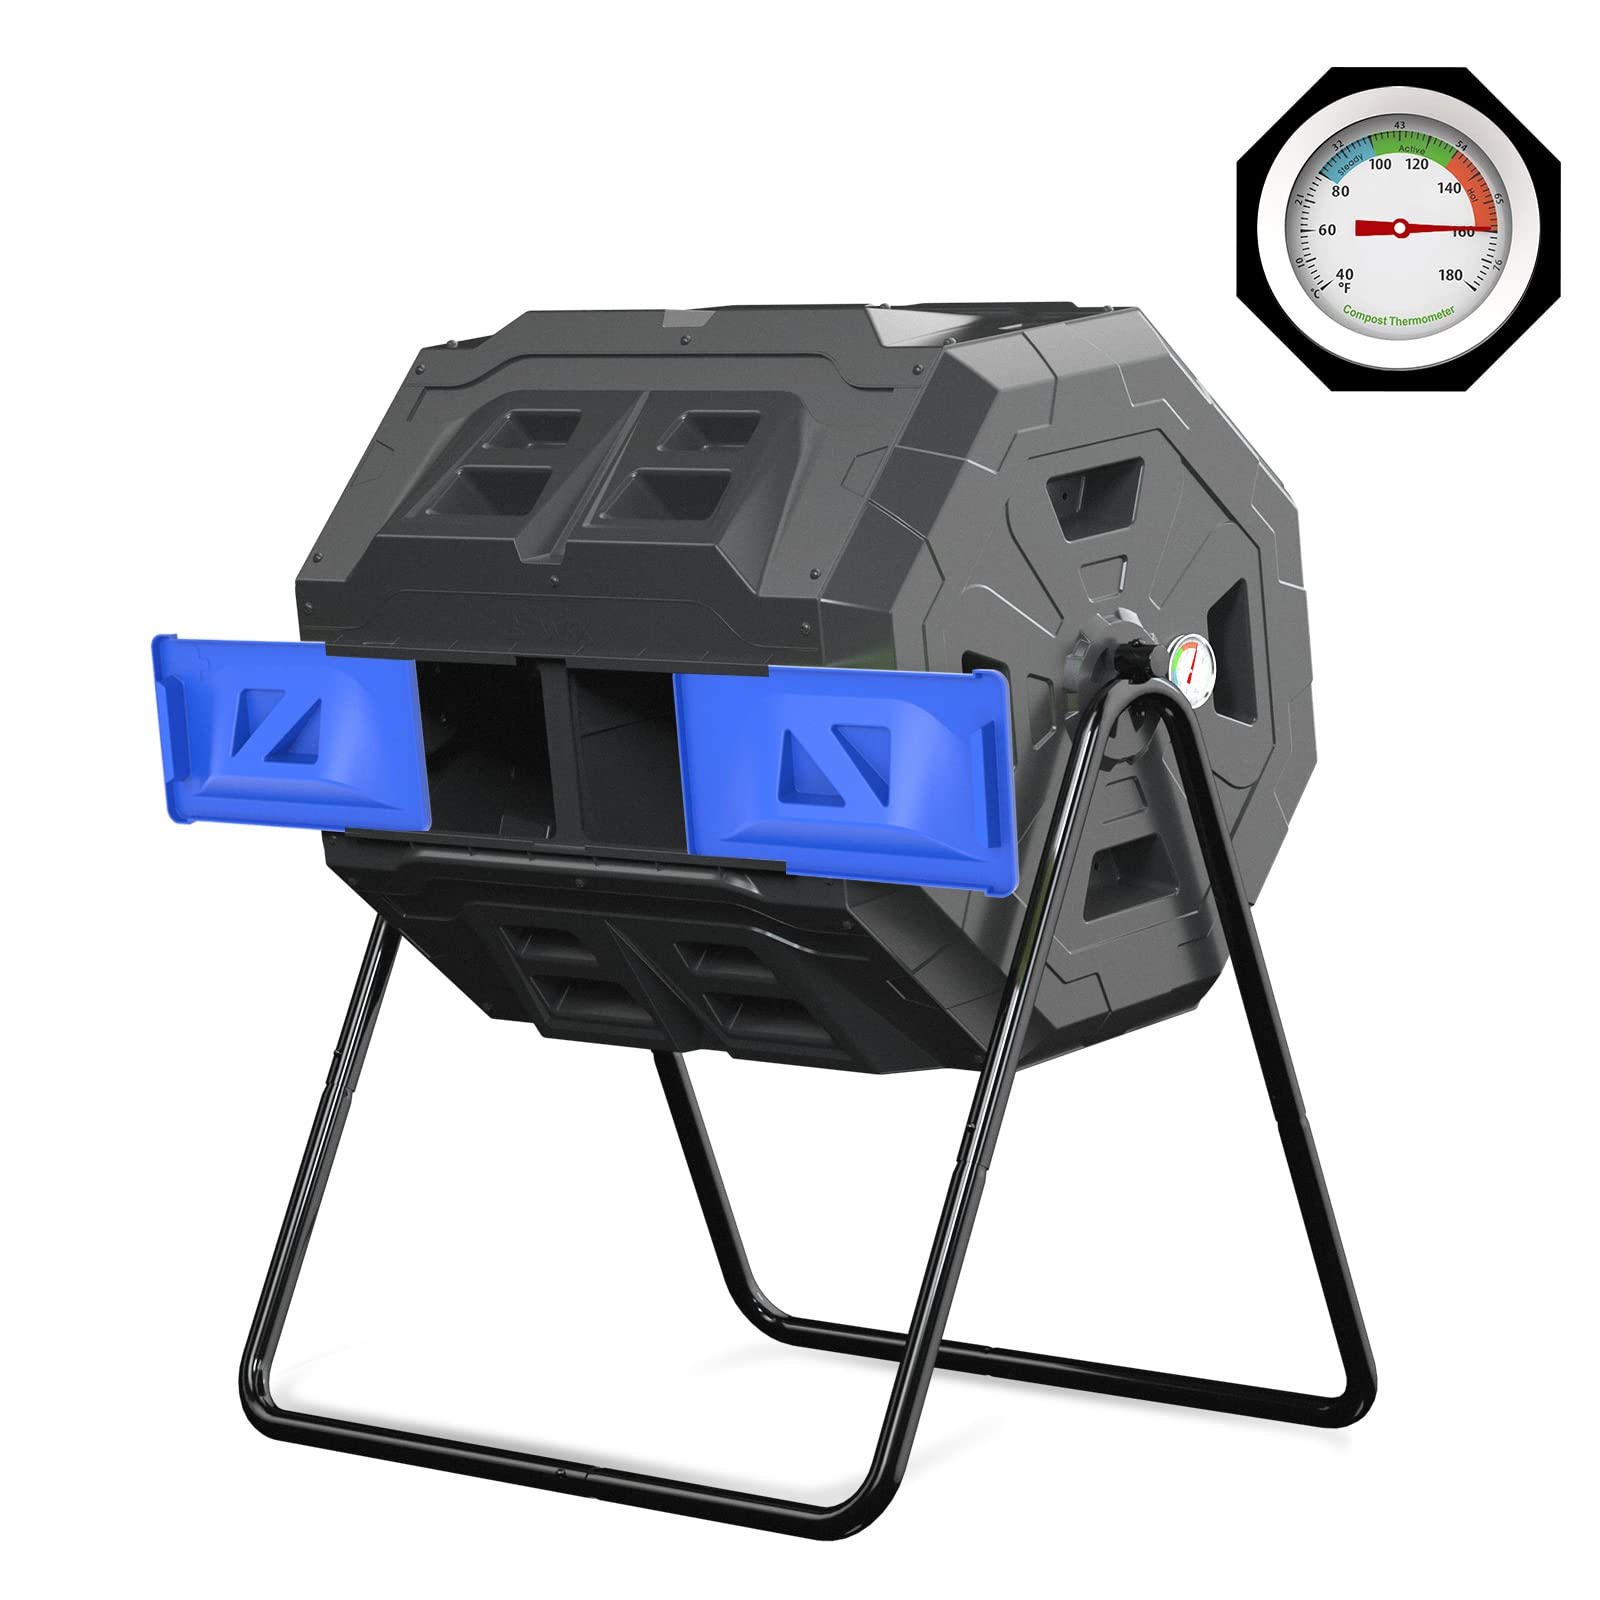 SQUEEZE master Large Compost Tumbler Bin